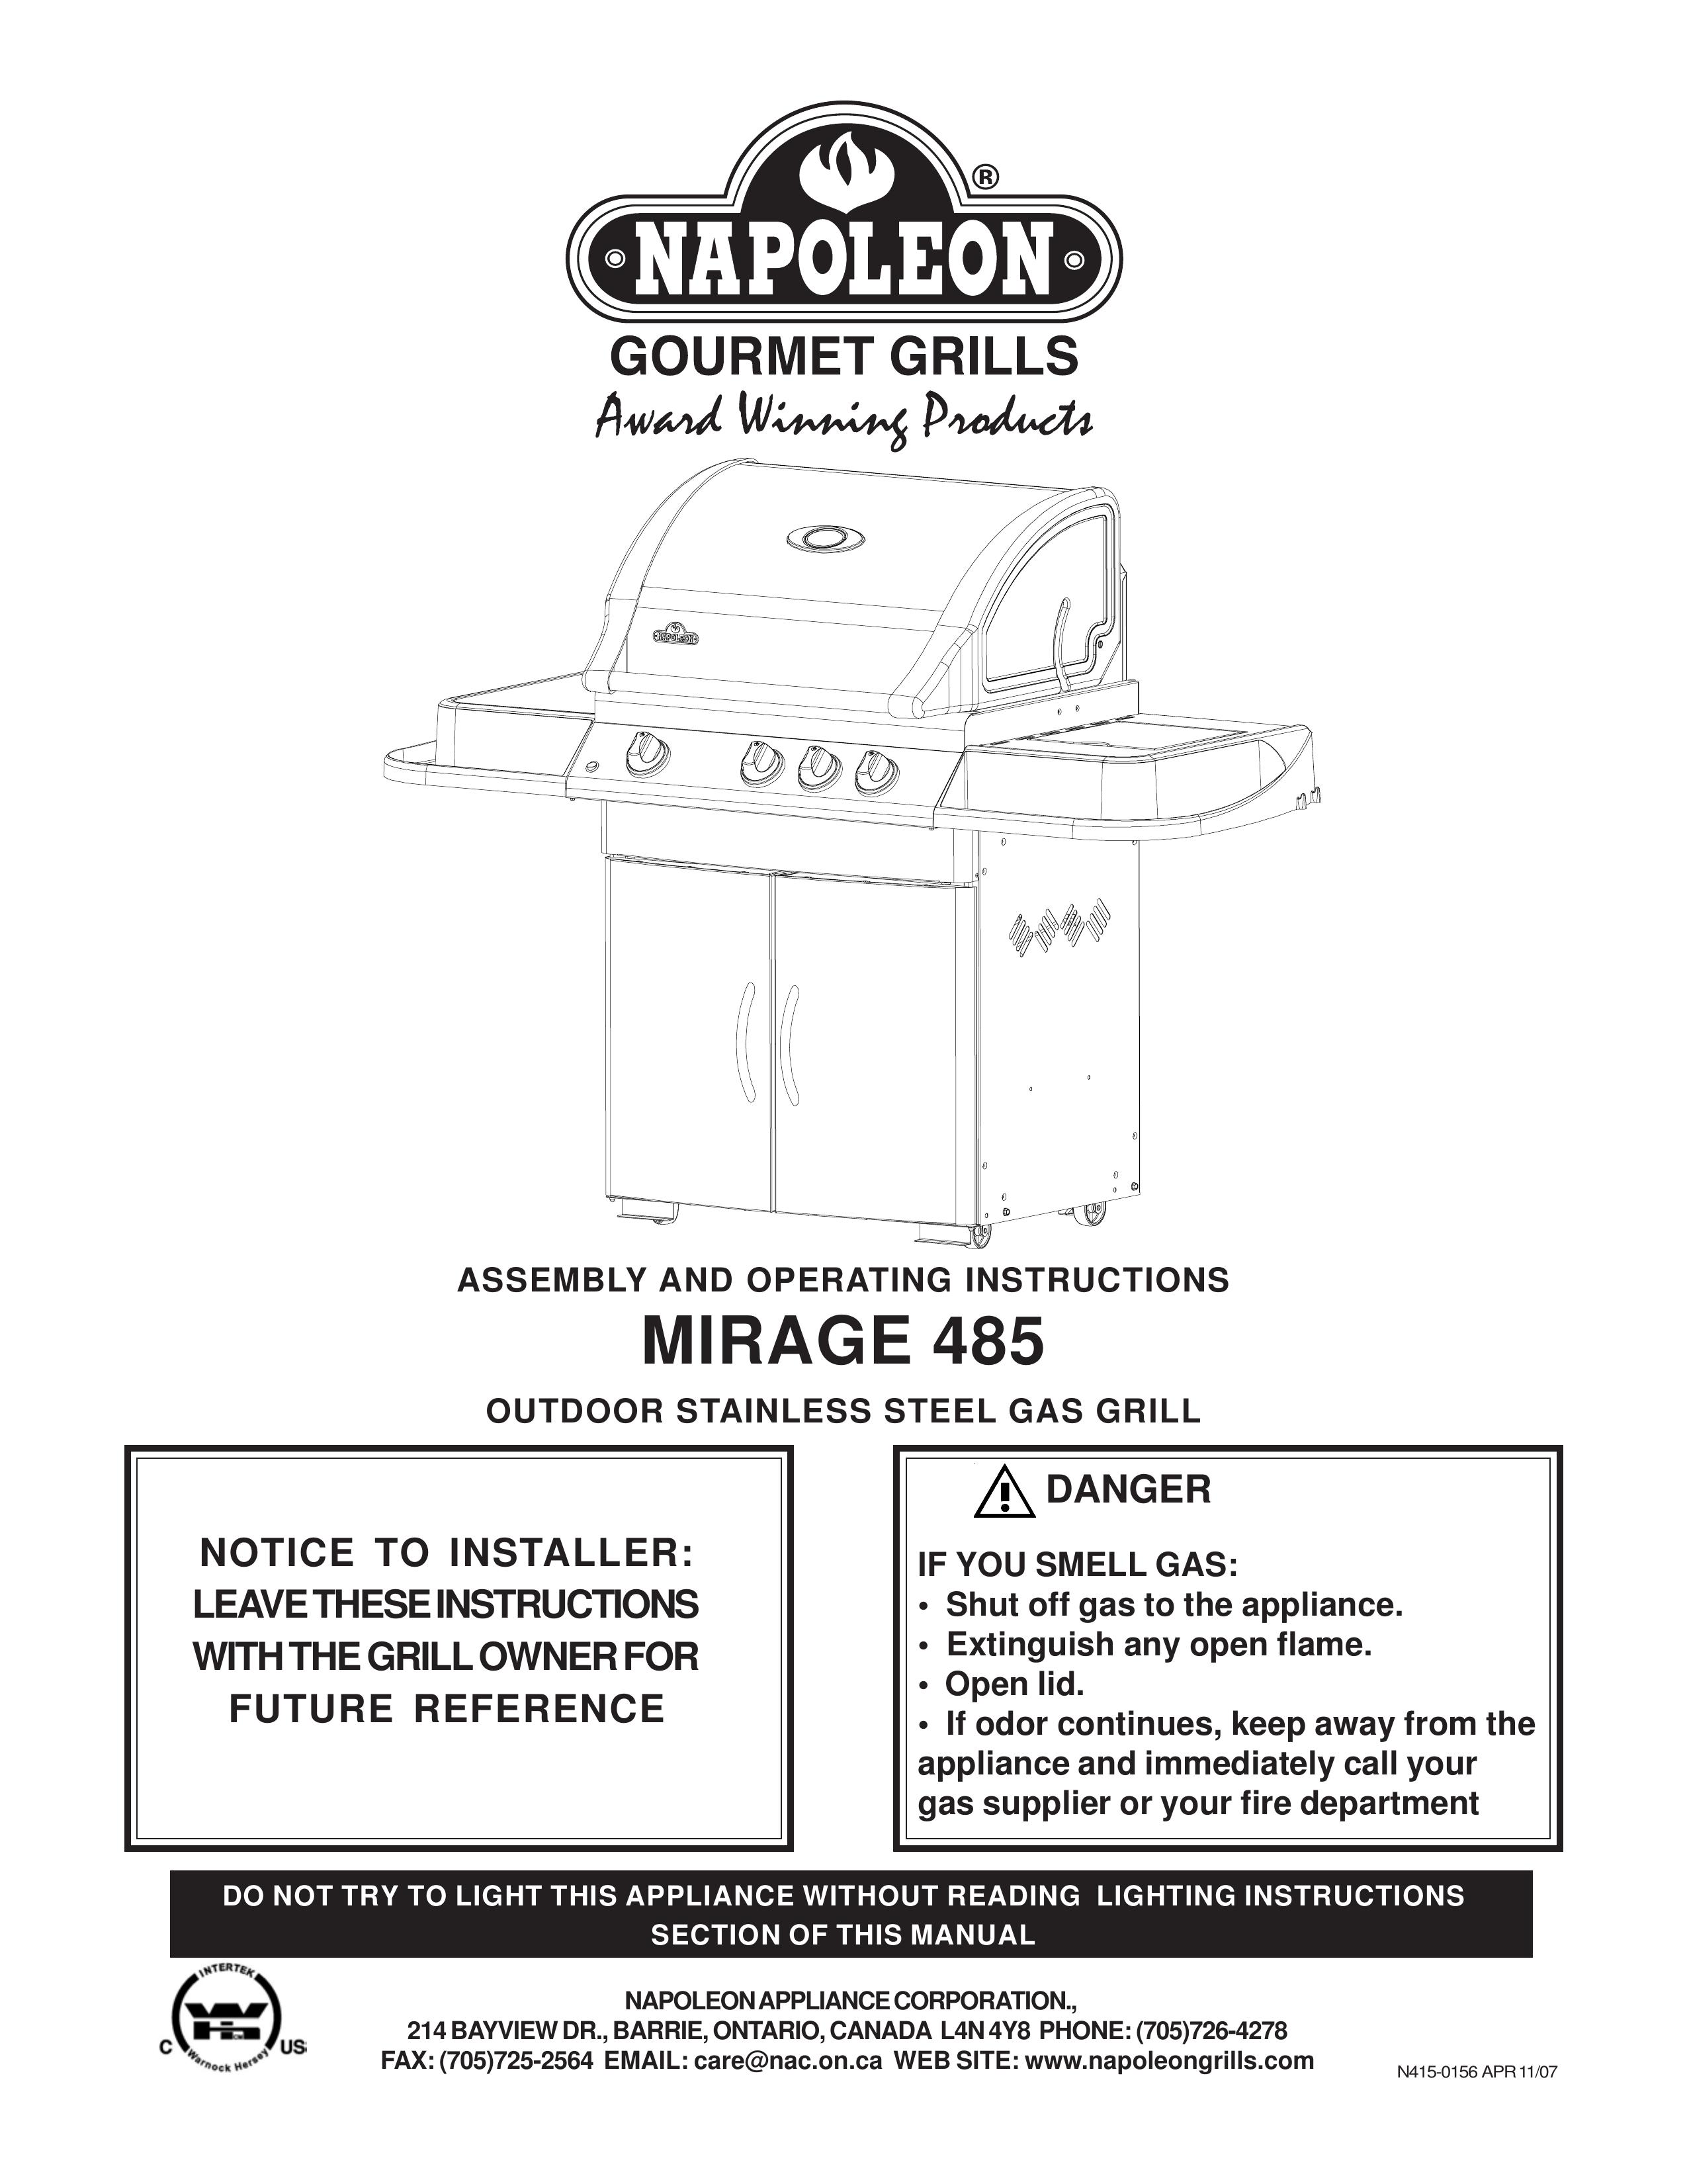 Napoleon Grills MIRAGE 485 Gas Grill User Manual